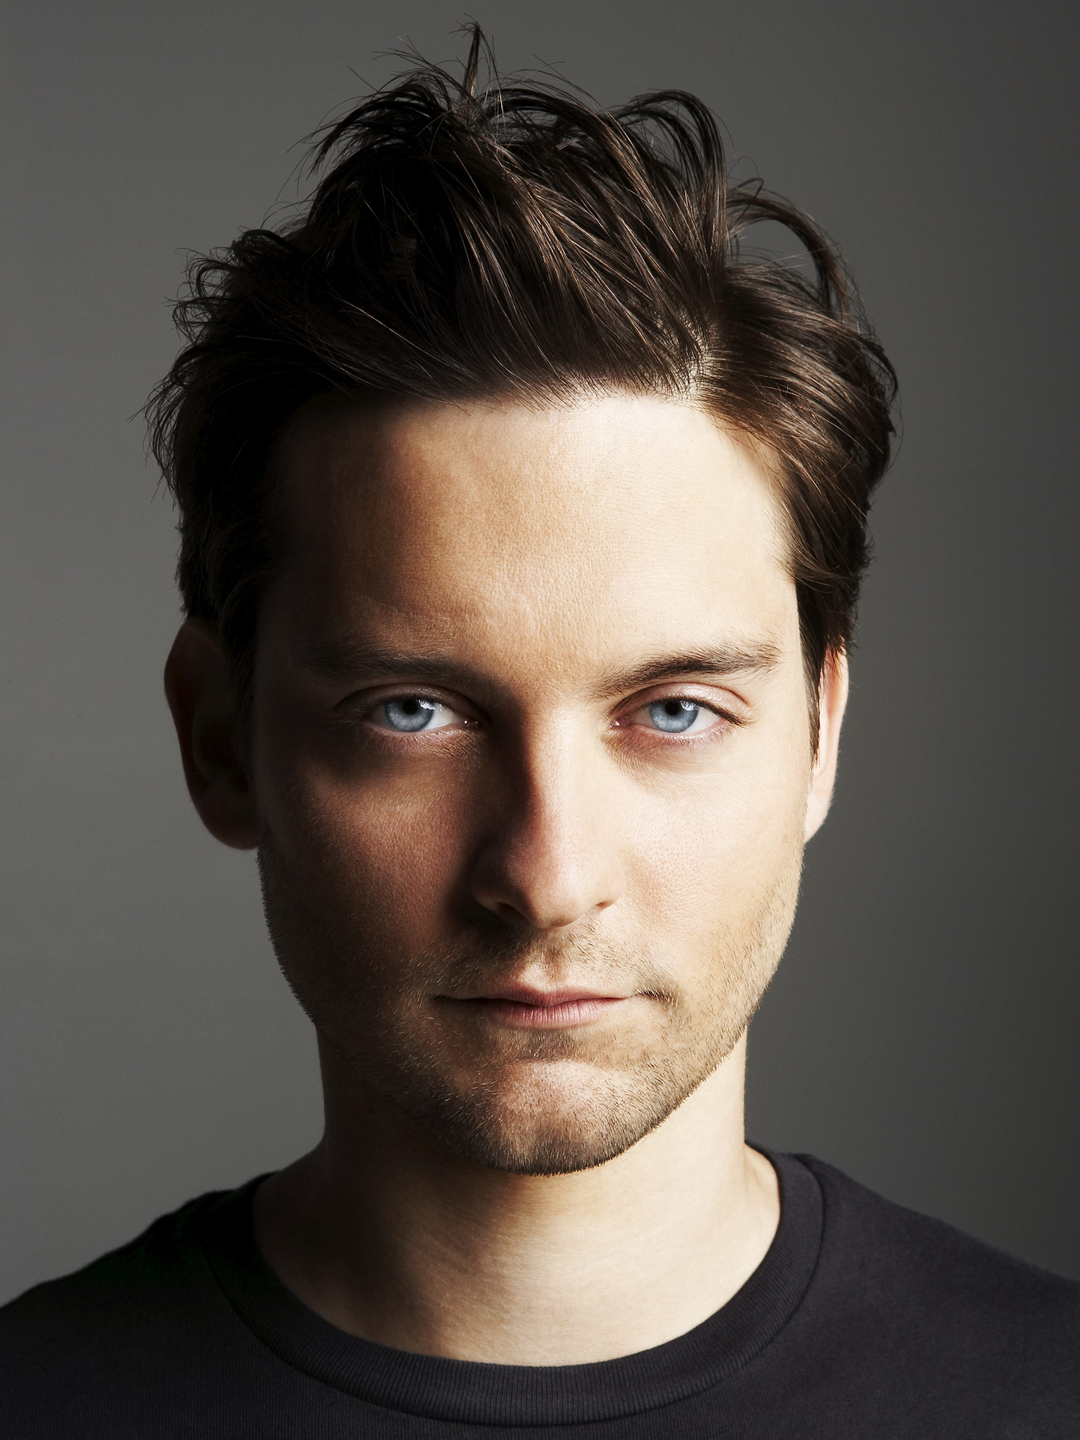 Tobey Maguire appearance